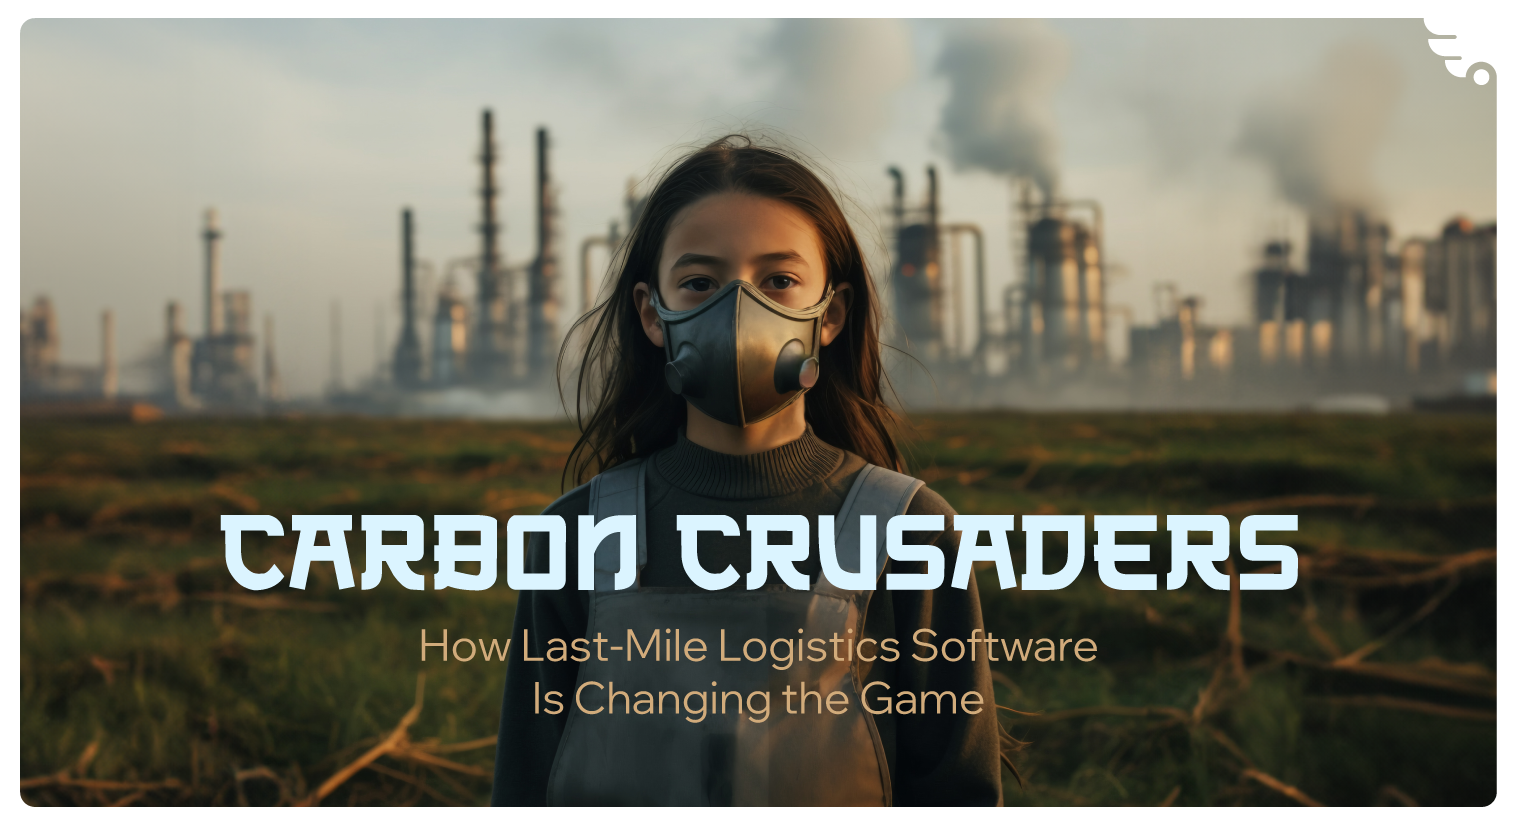 Carbon Crusaders: How Last-Mile Logistics Software Is Changing the Game